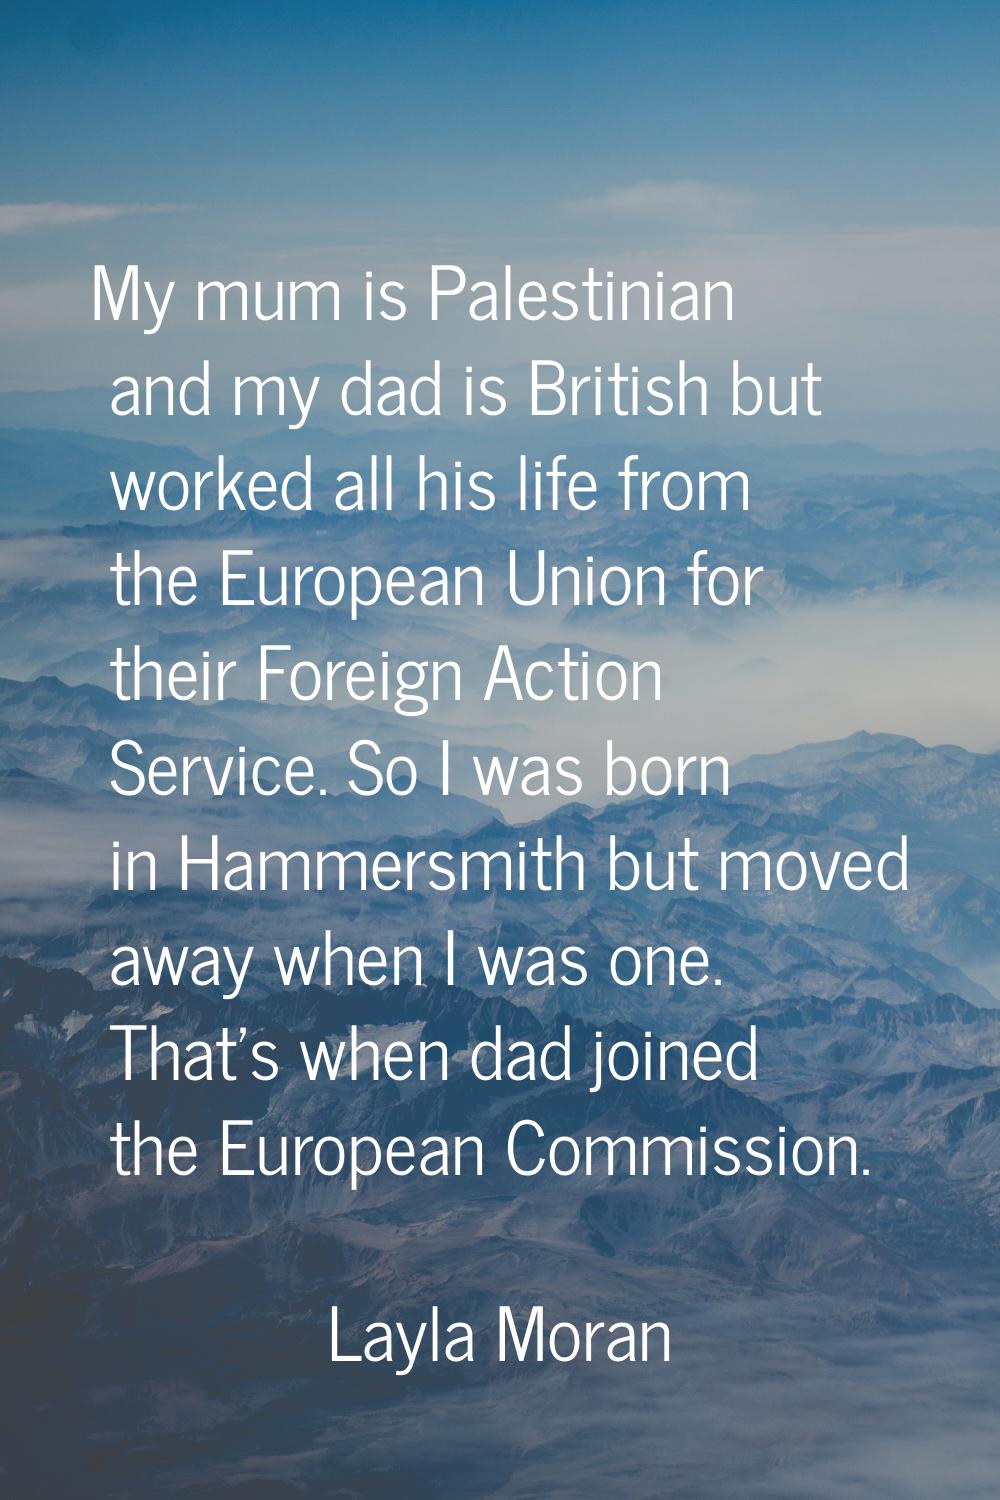 My mum is Palestinian and my dad is British but worked all his life from the European Union for the